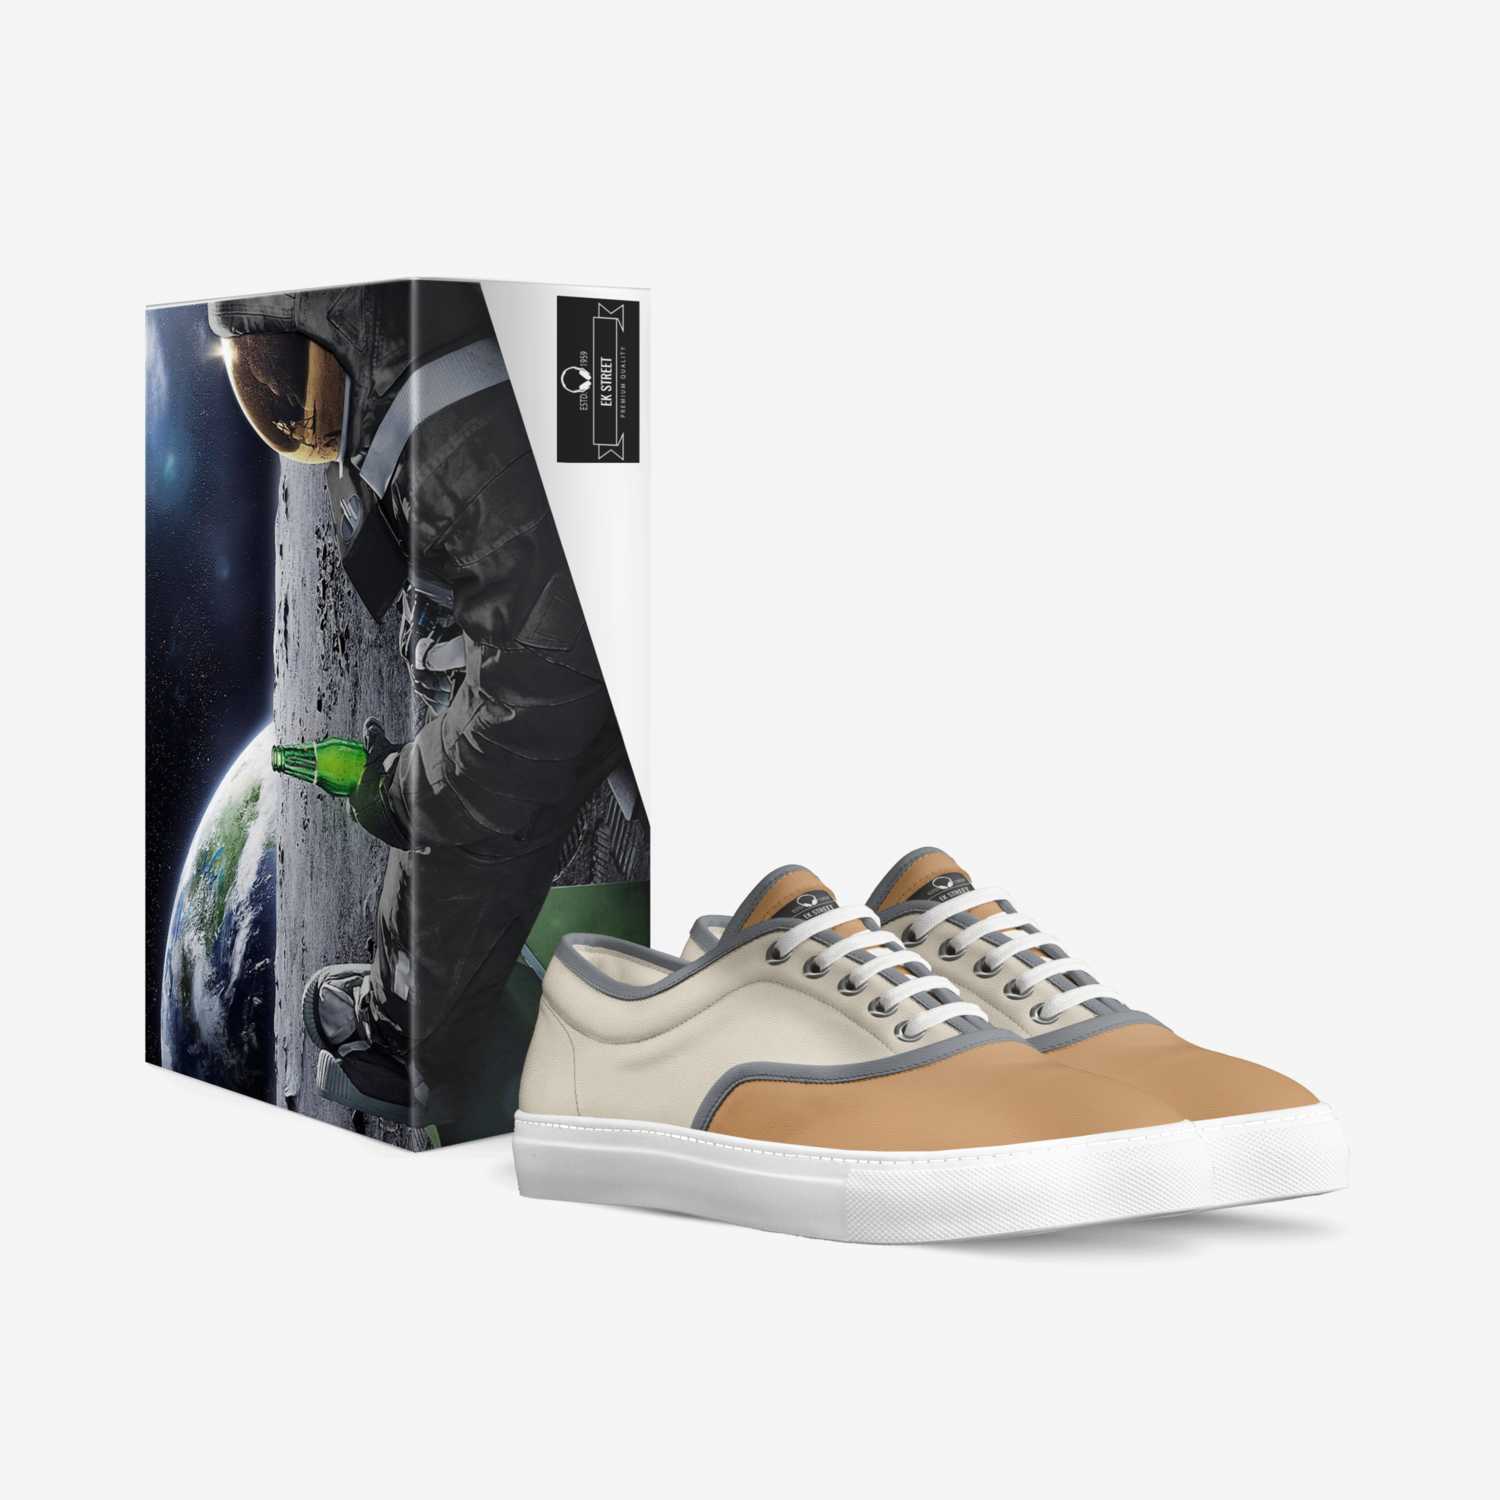 EK Street custom made in Italy shoes by Lifestyle Basics | Box view